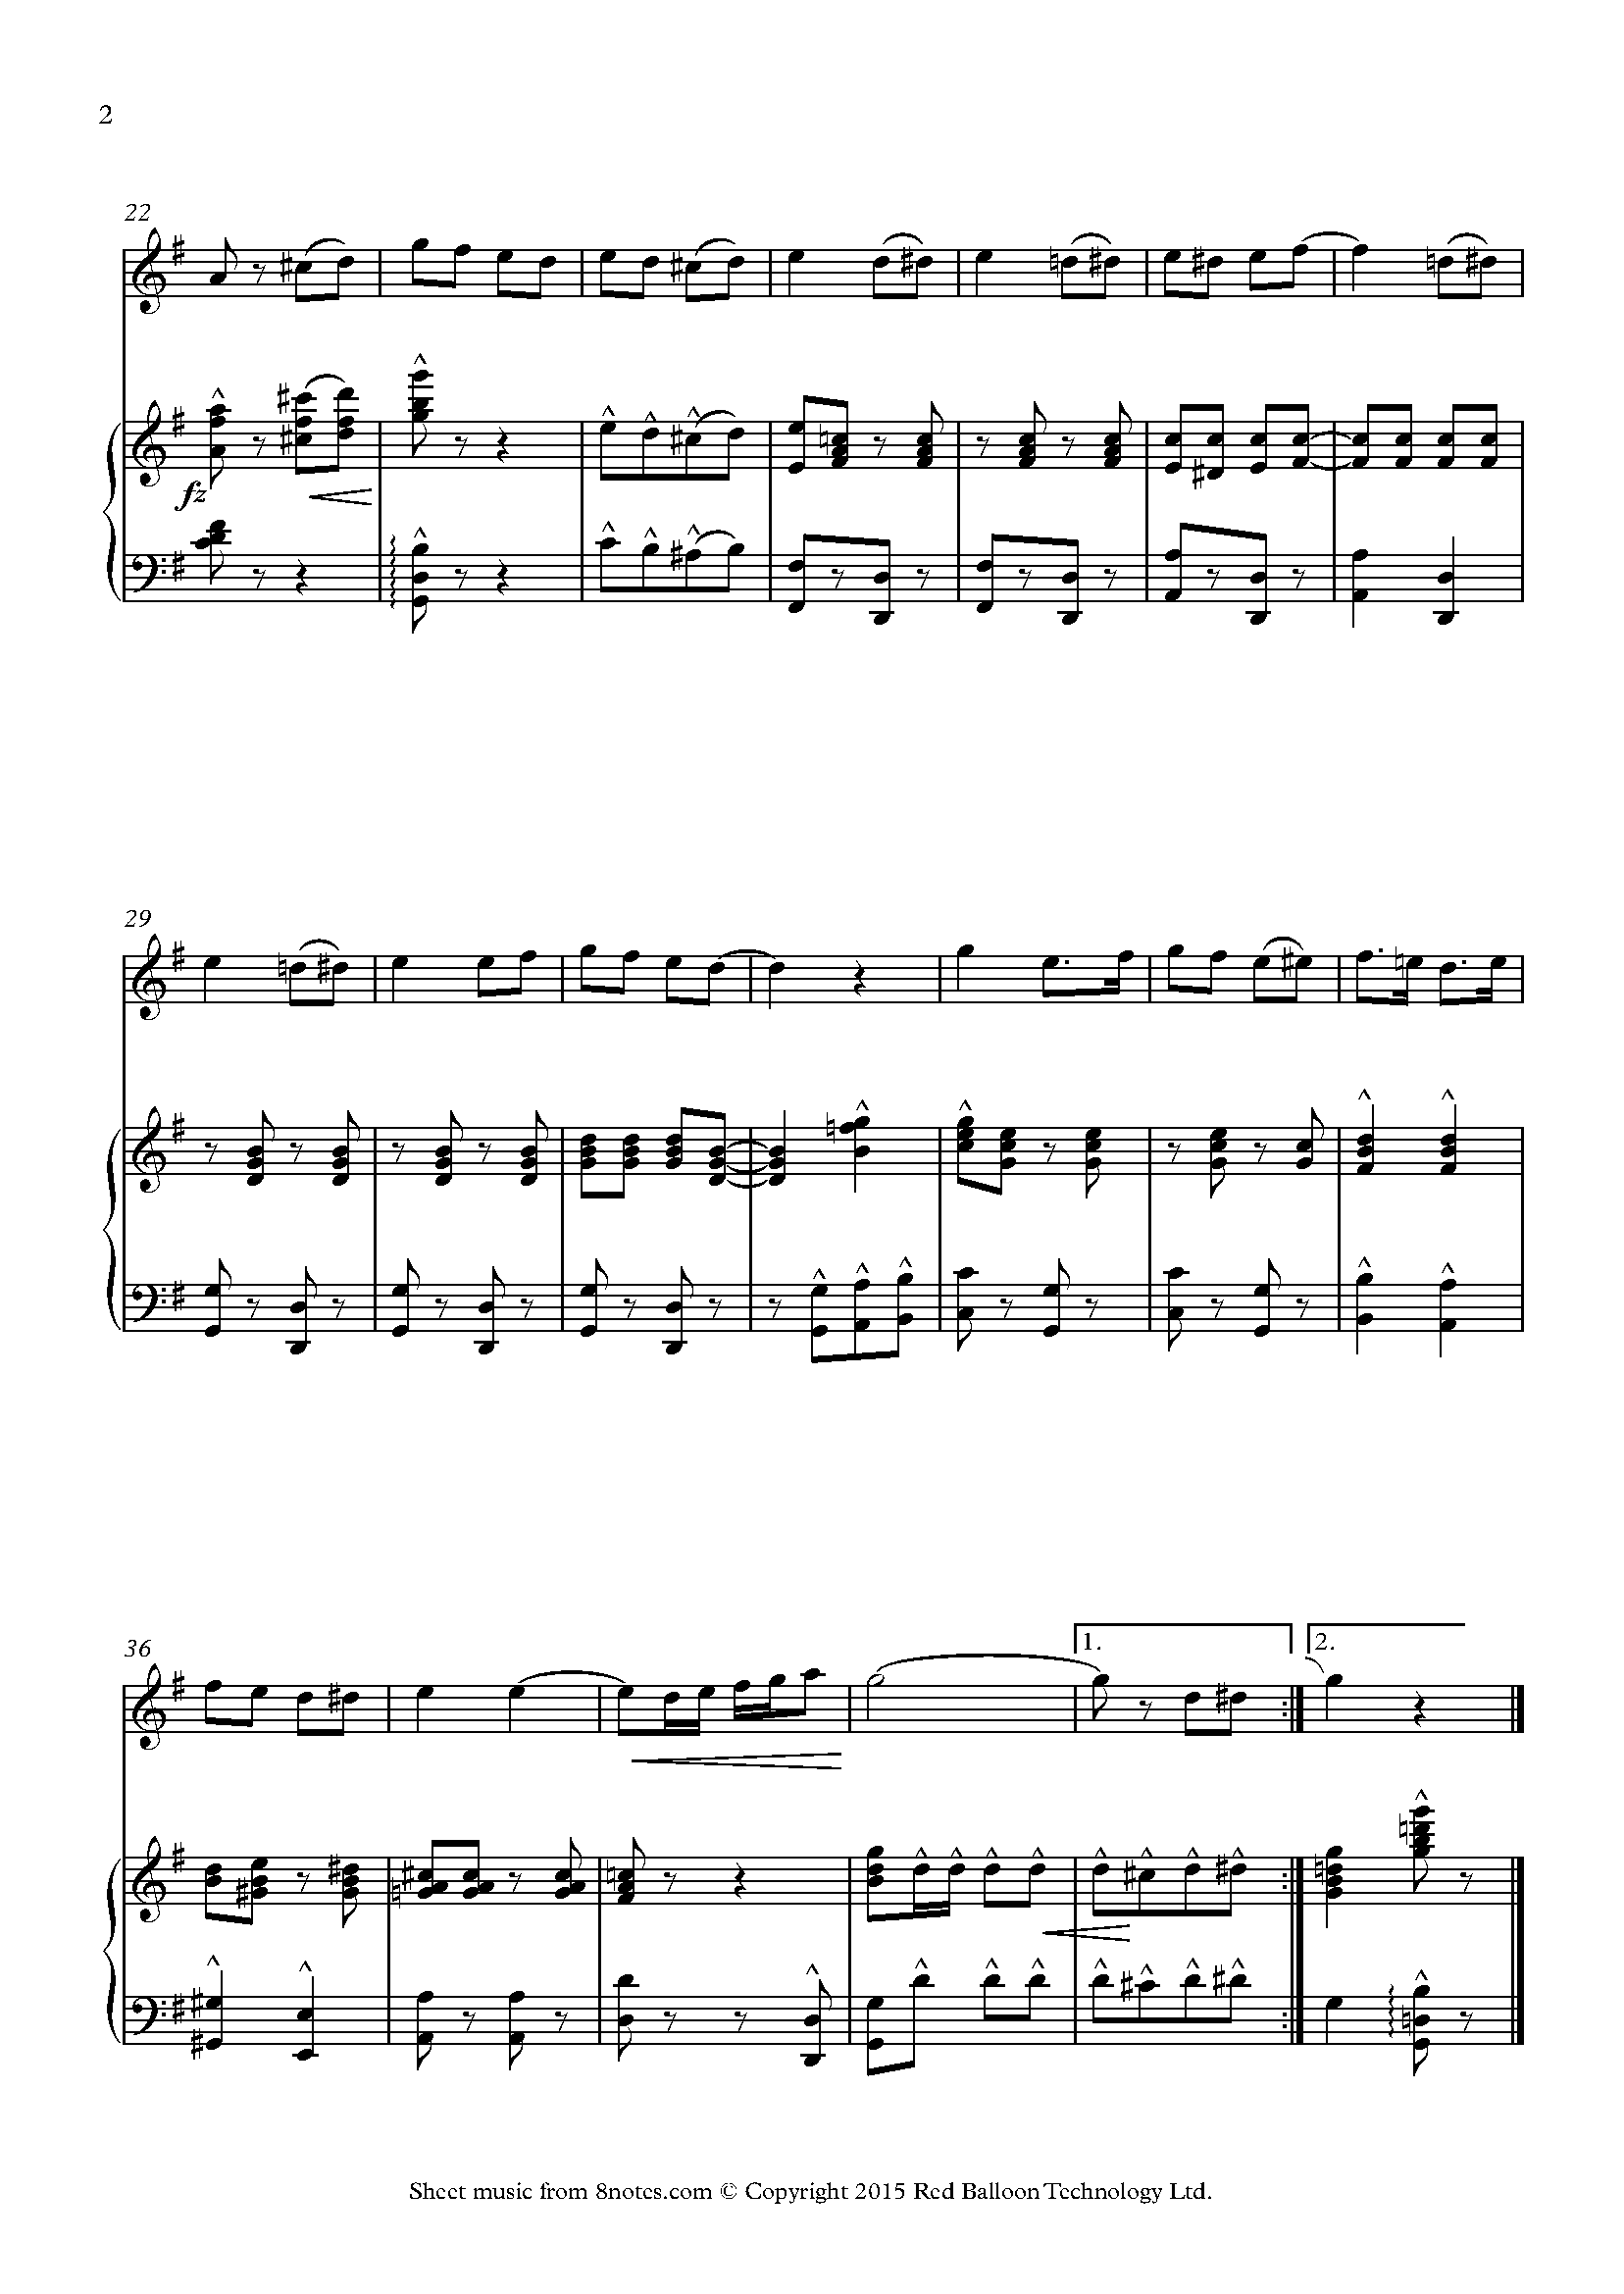 Harry Carroll - By The Beautiful Sea Sheet music for Violin - 8notes.com